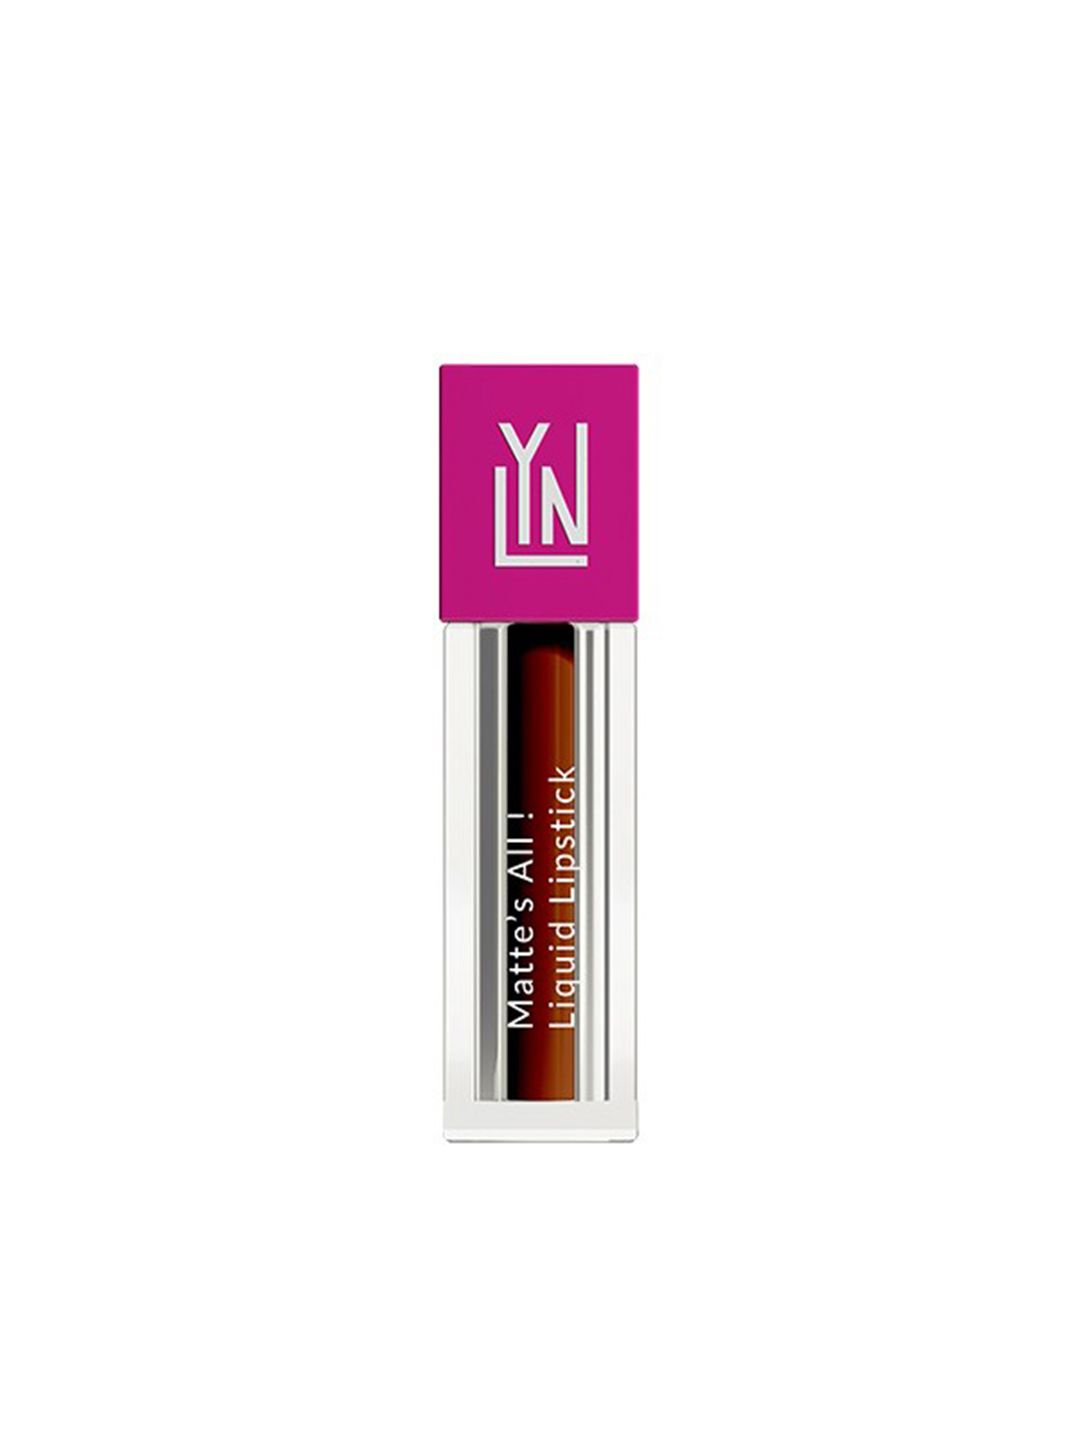 LYN LIVE YOUR NOW  Matte Liquid Lipstick-Brownie Point 1ml Price in India